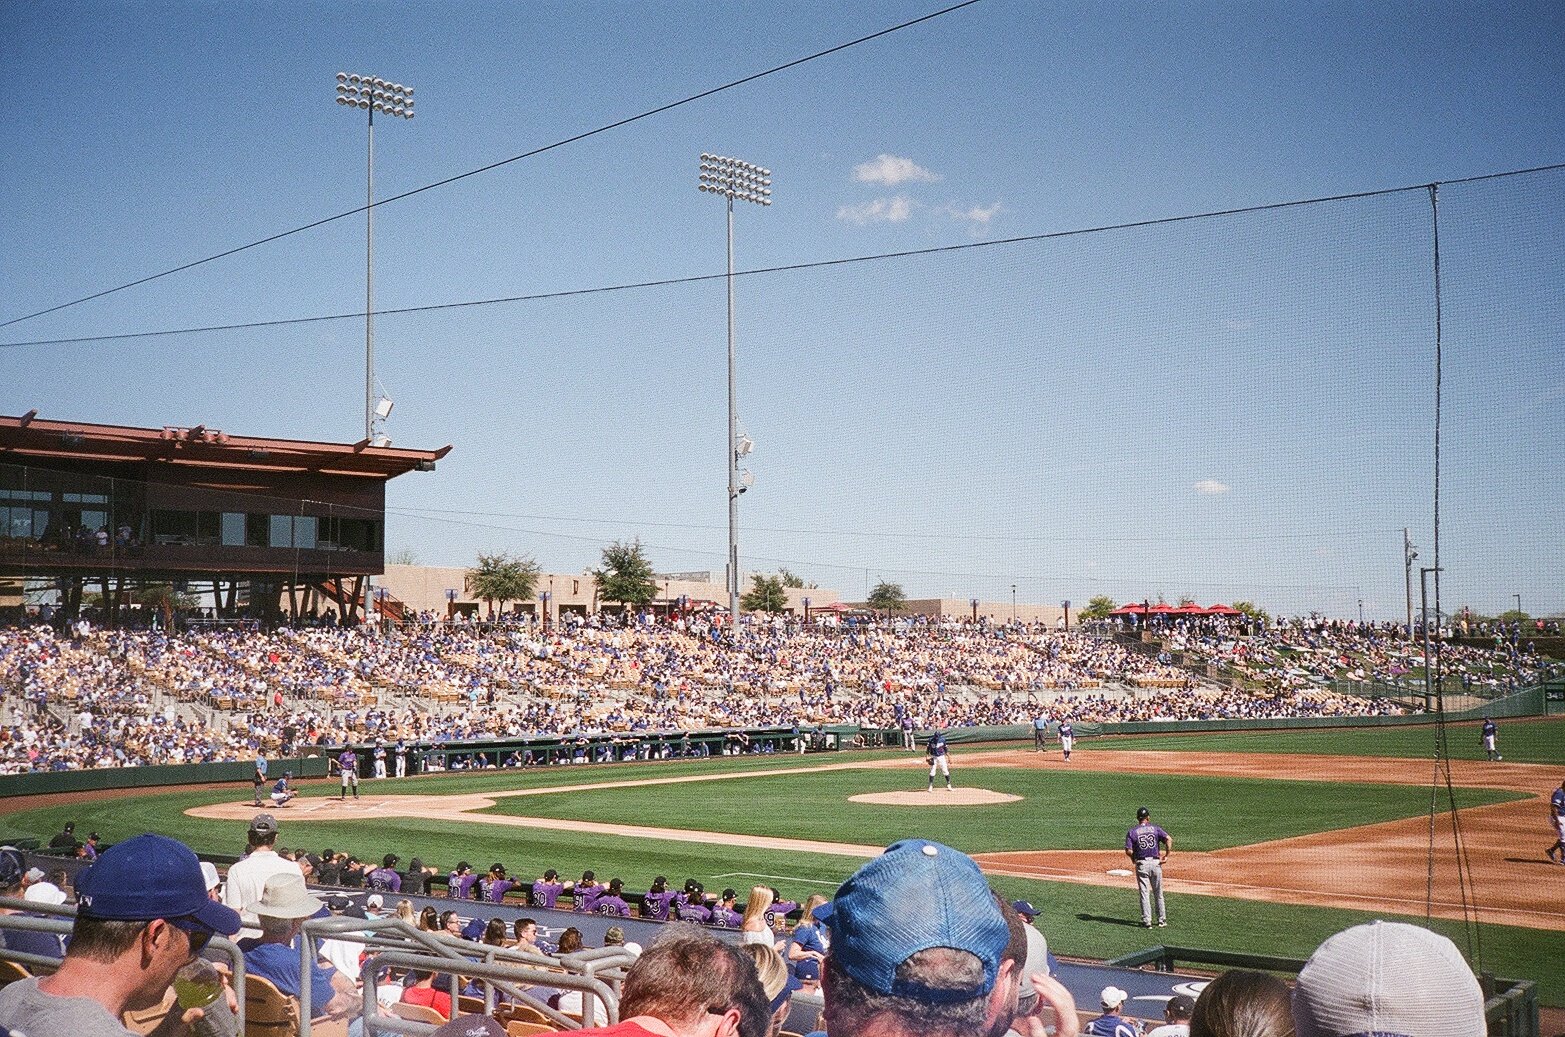 A baseball field is seen with fans in the stands and players on the field during a game. 